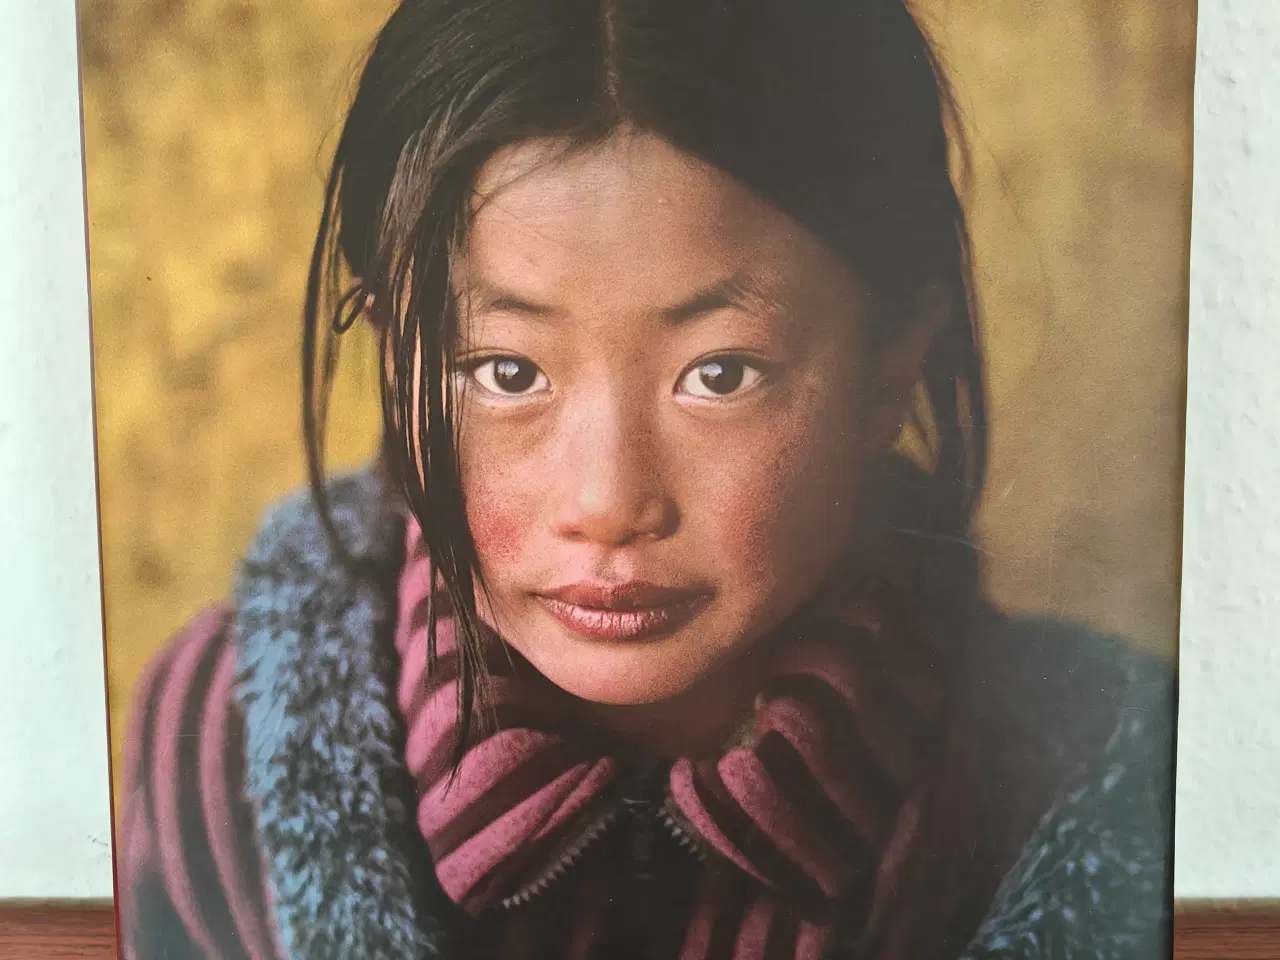 Billede 1 - Portraits by Steve McCurry